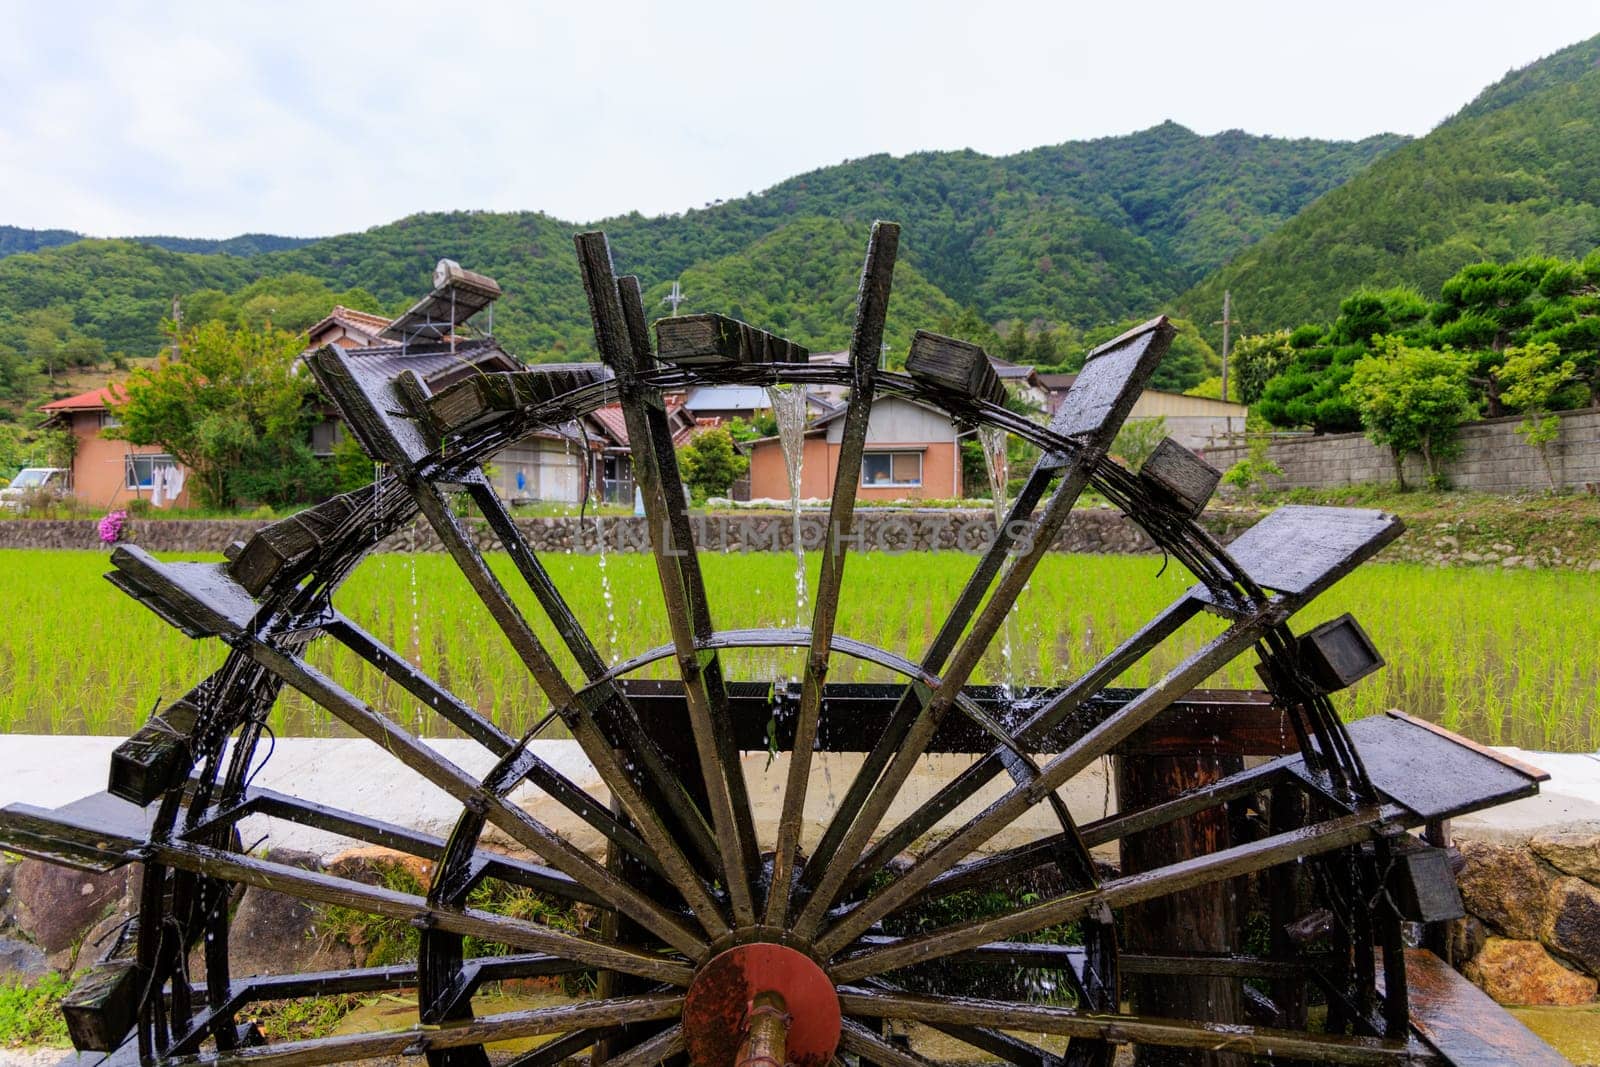 Historic wooden water wheel by rice field in Japanese countryside by Osaze